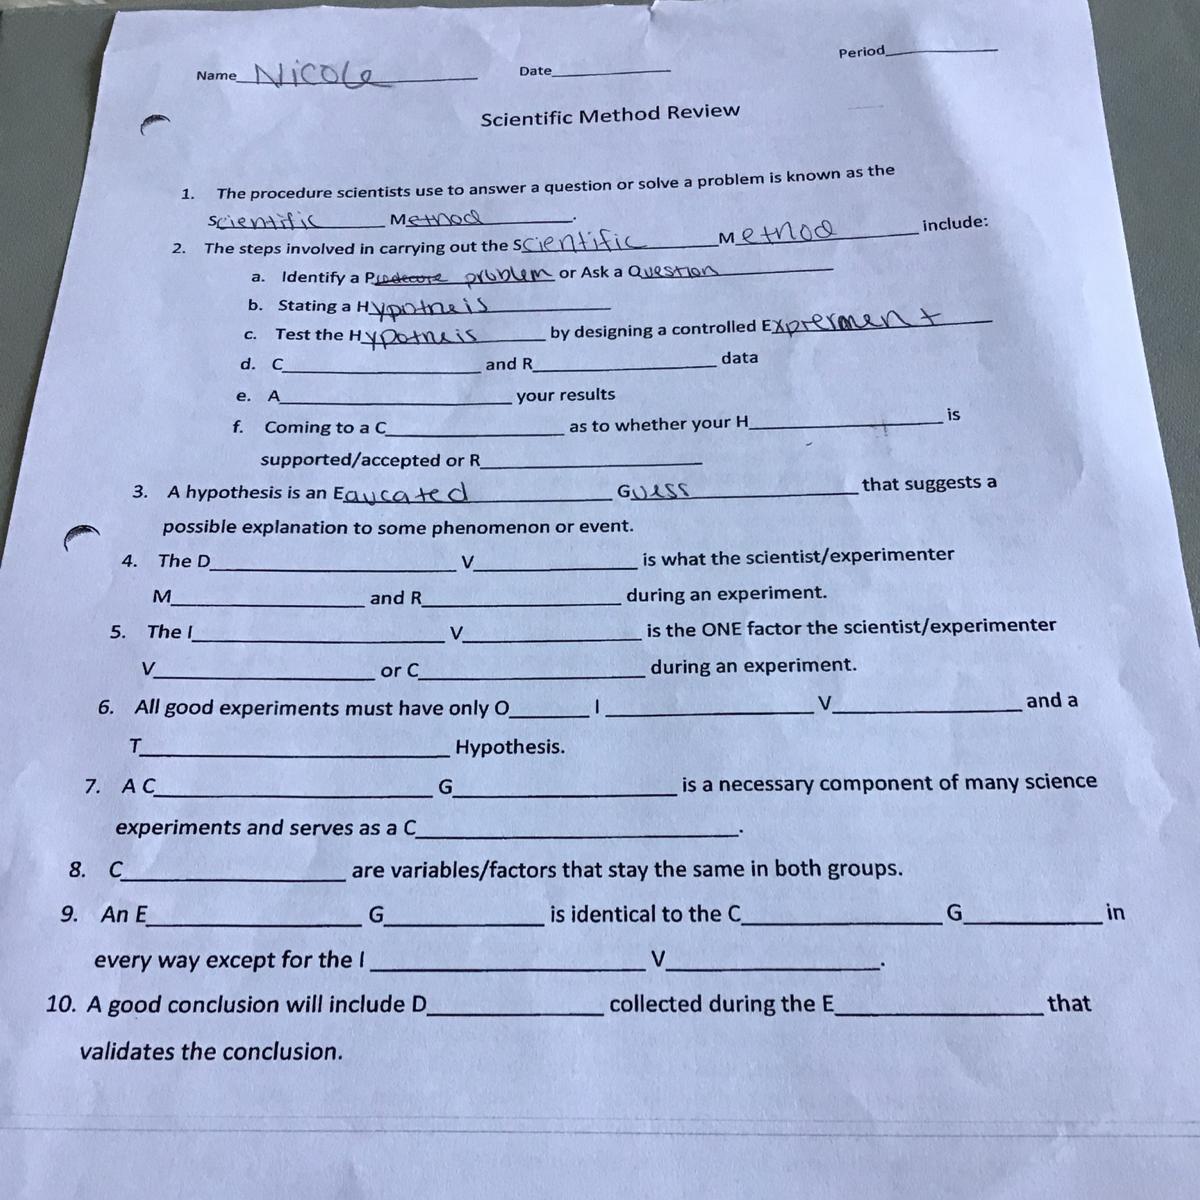 Practice with the scientific method worksheet answers